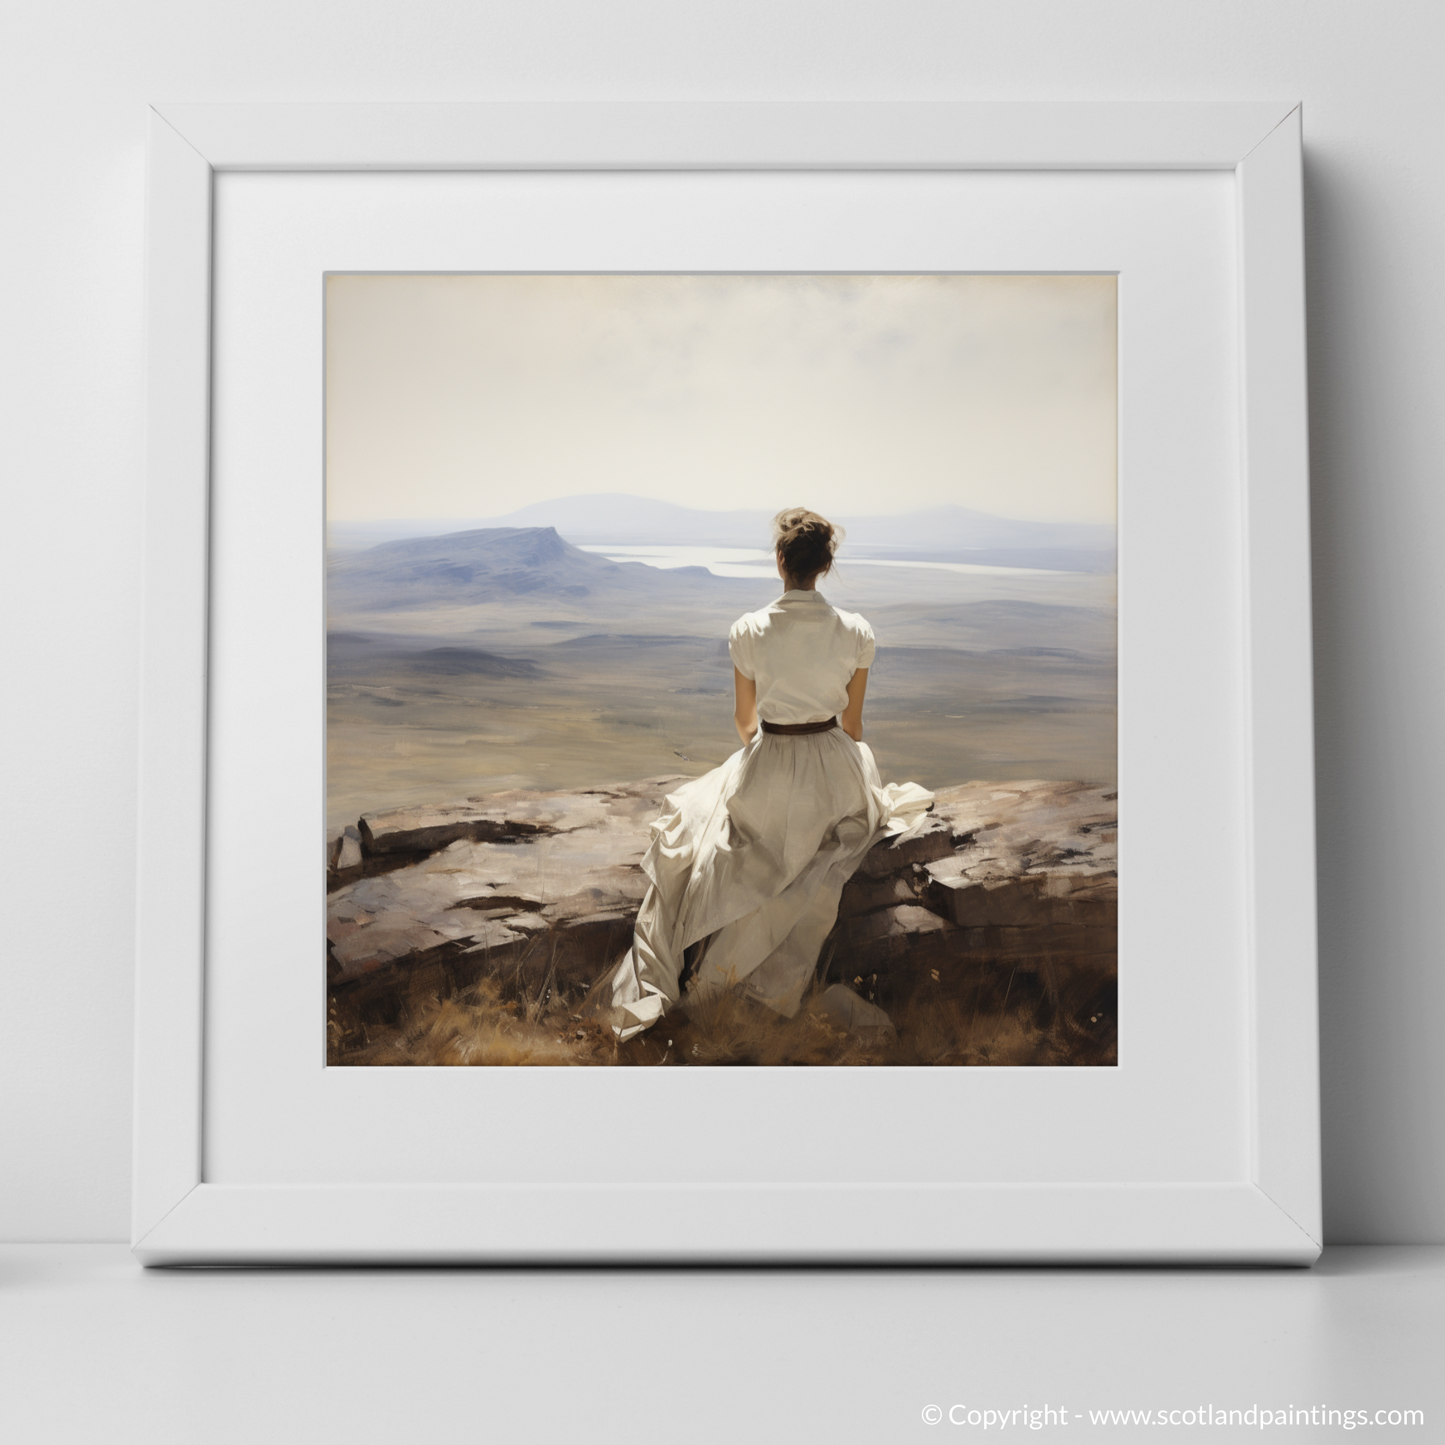 Highland Serenity: A Moment in White